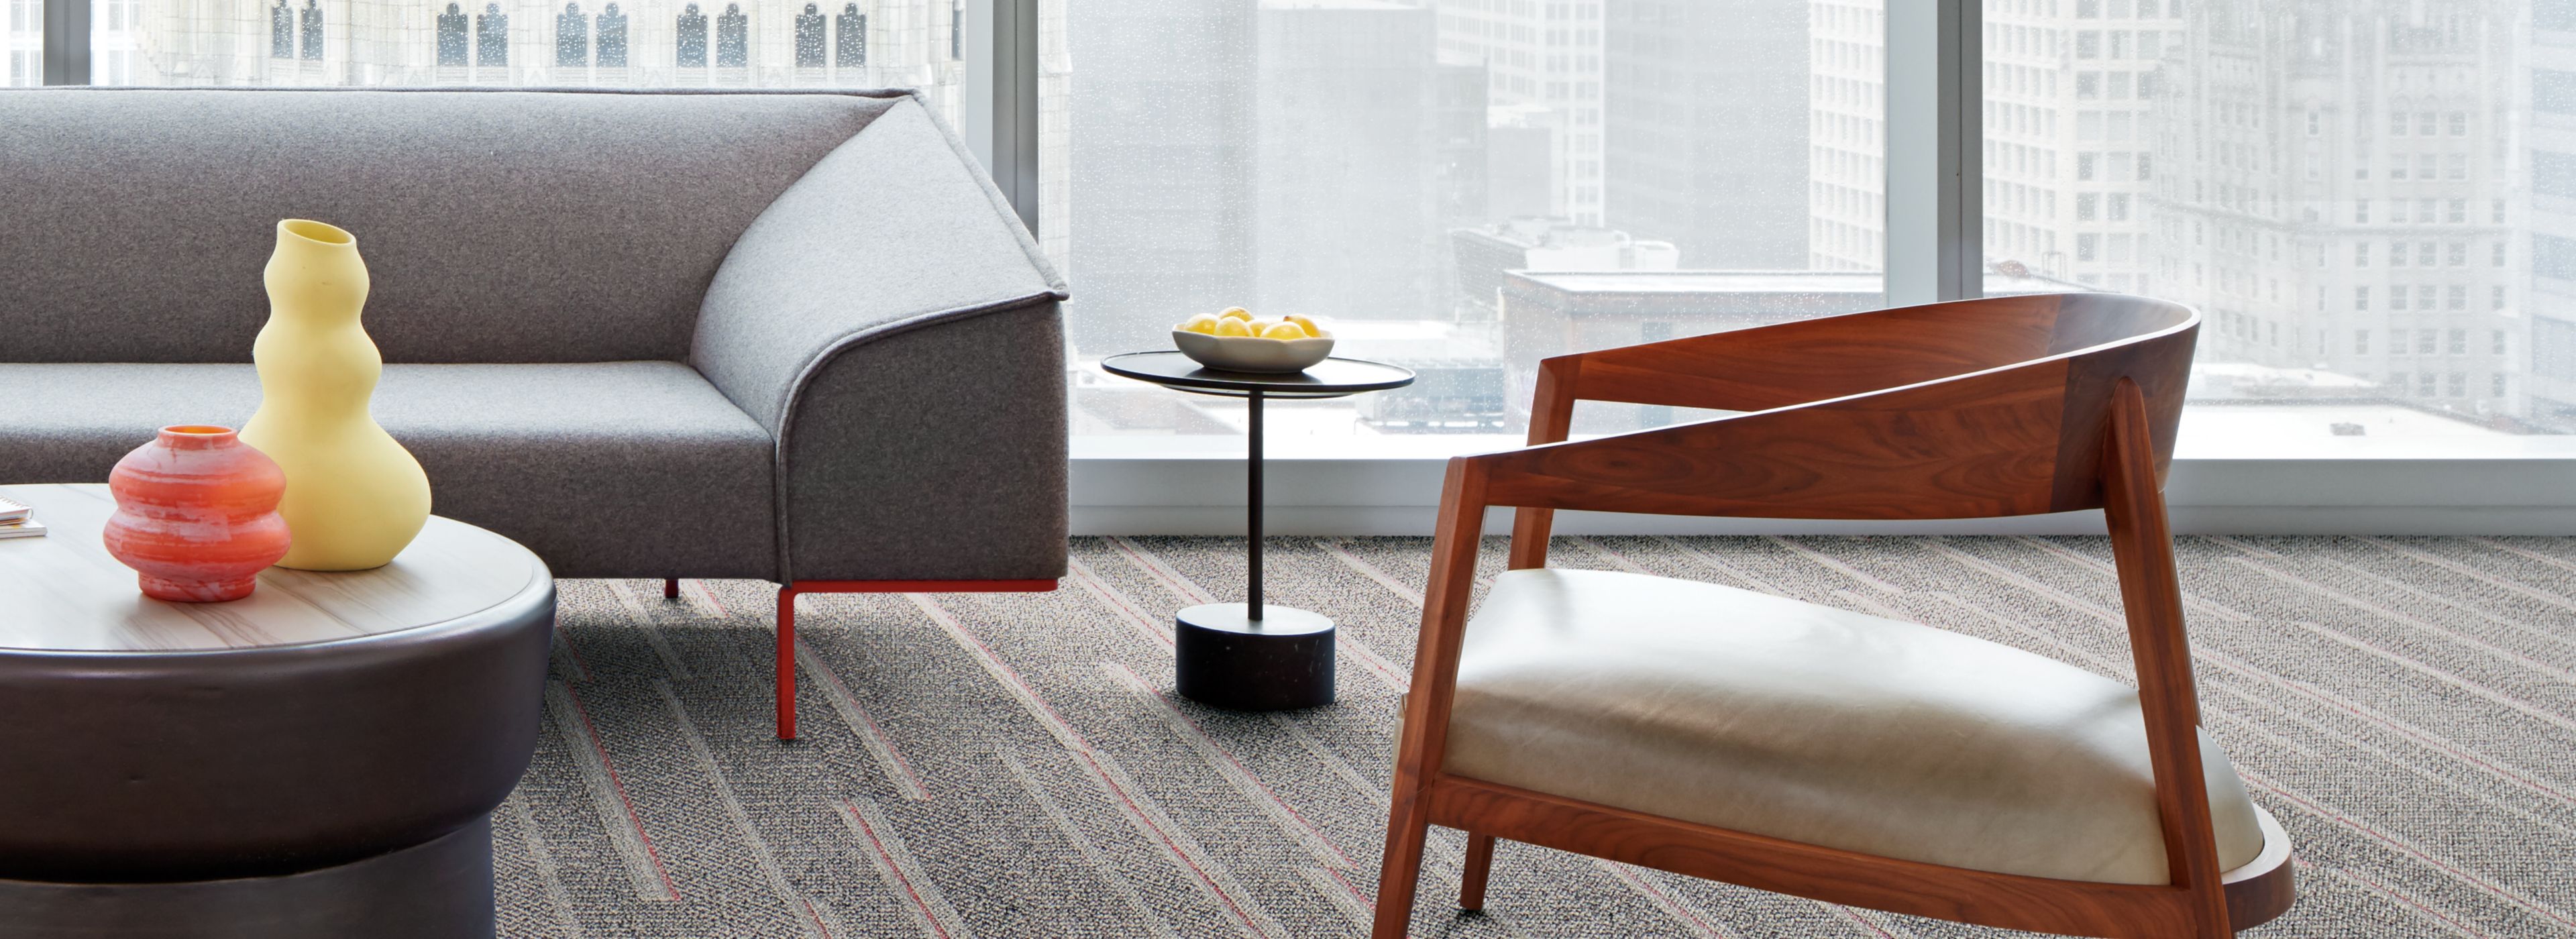 Interface Simple Sash plank carpet tile in common are with chairs numéro d’image 1